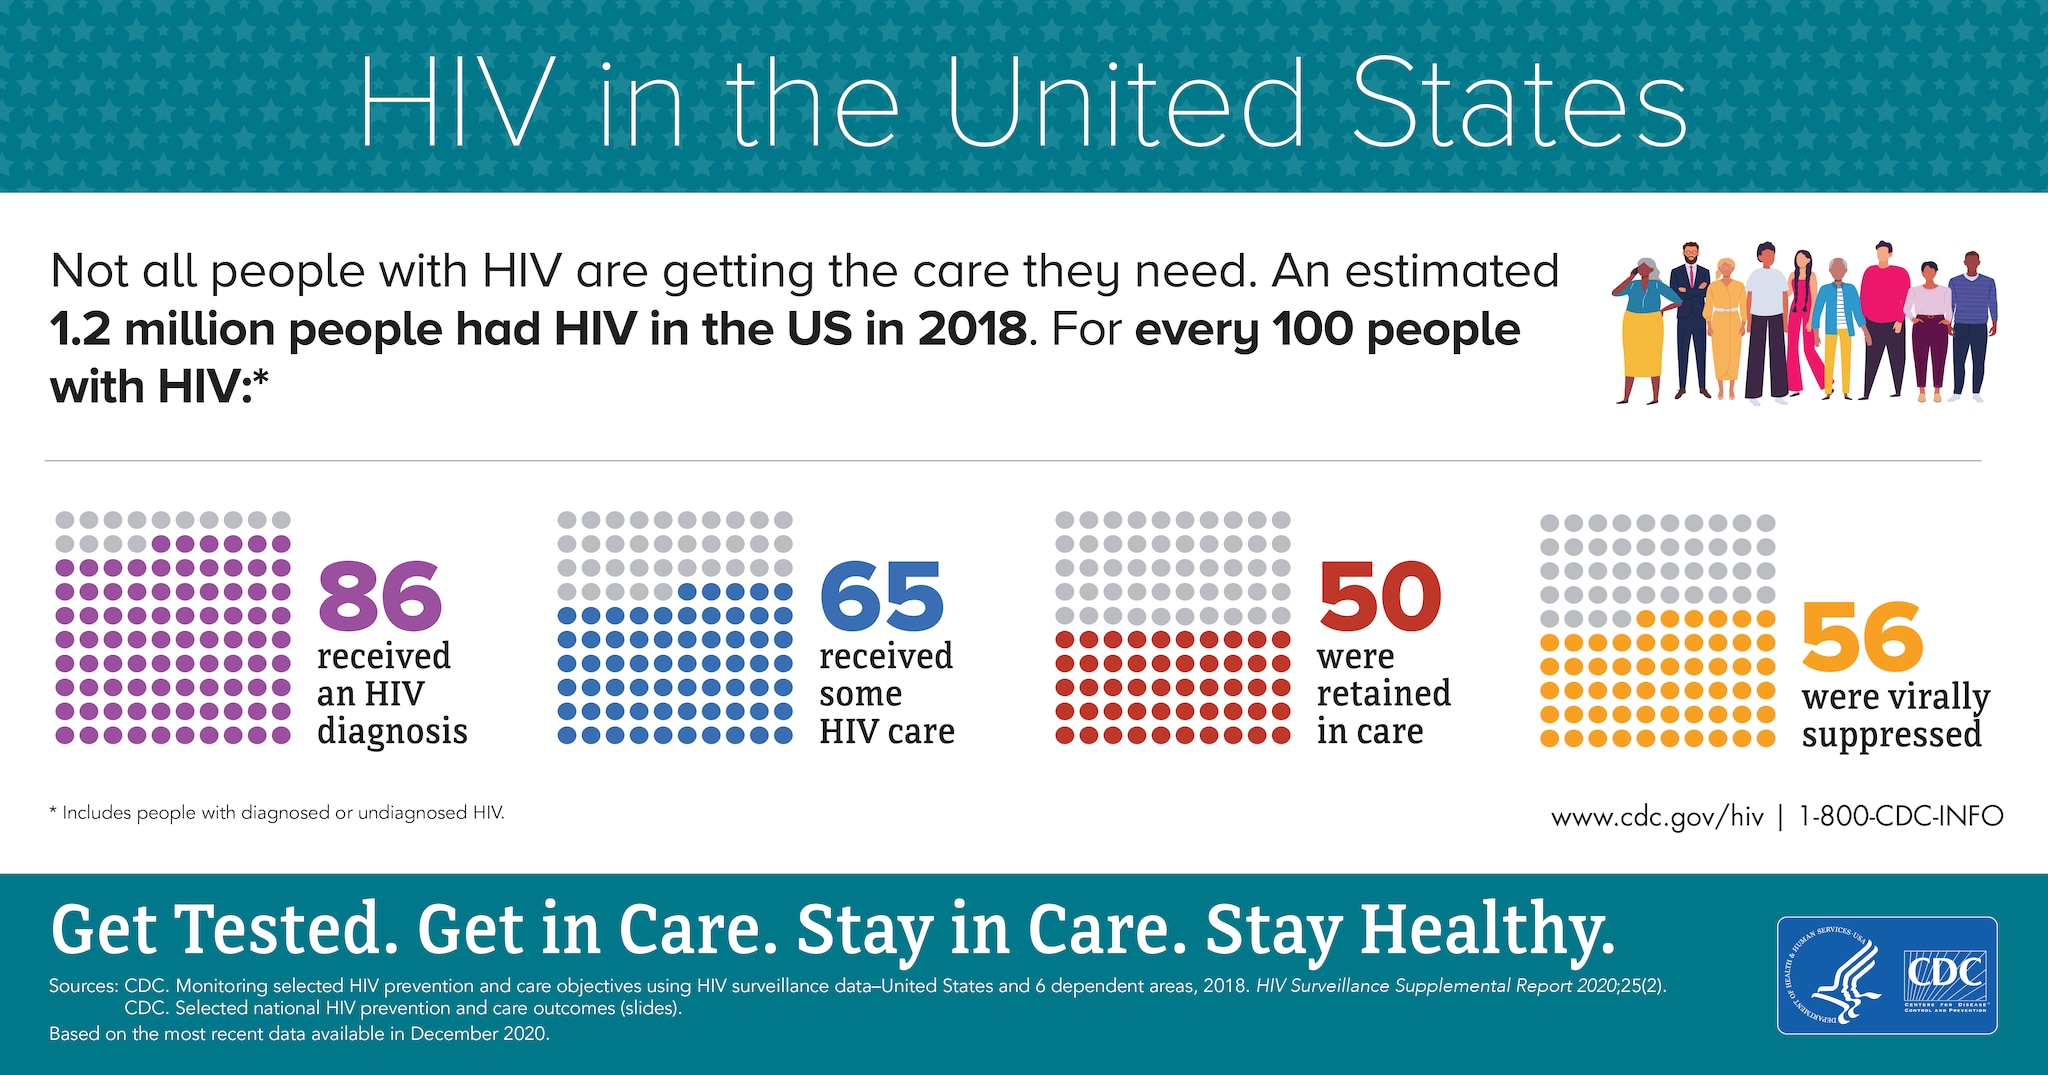 Infographic title is HIV in the United States. A group image is to the right of the infographic. Text reads Not all people are getting the care they need. An estimated 1.2 million people had HIV in the US in 2018. For every 100 people with HIV: 86 received an HIV diagnosis, 65 received some HIV care, 50 were retained in care, and 56 were virally suppressed. Get tested. Get in care. Stay in care. Stay healthy.